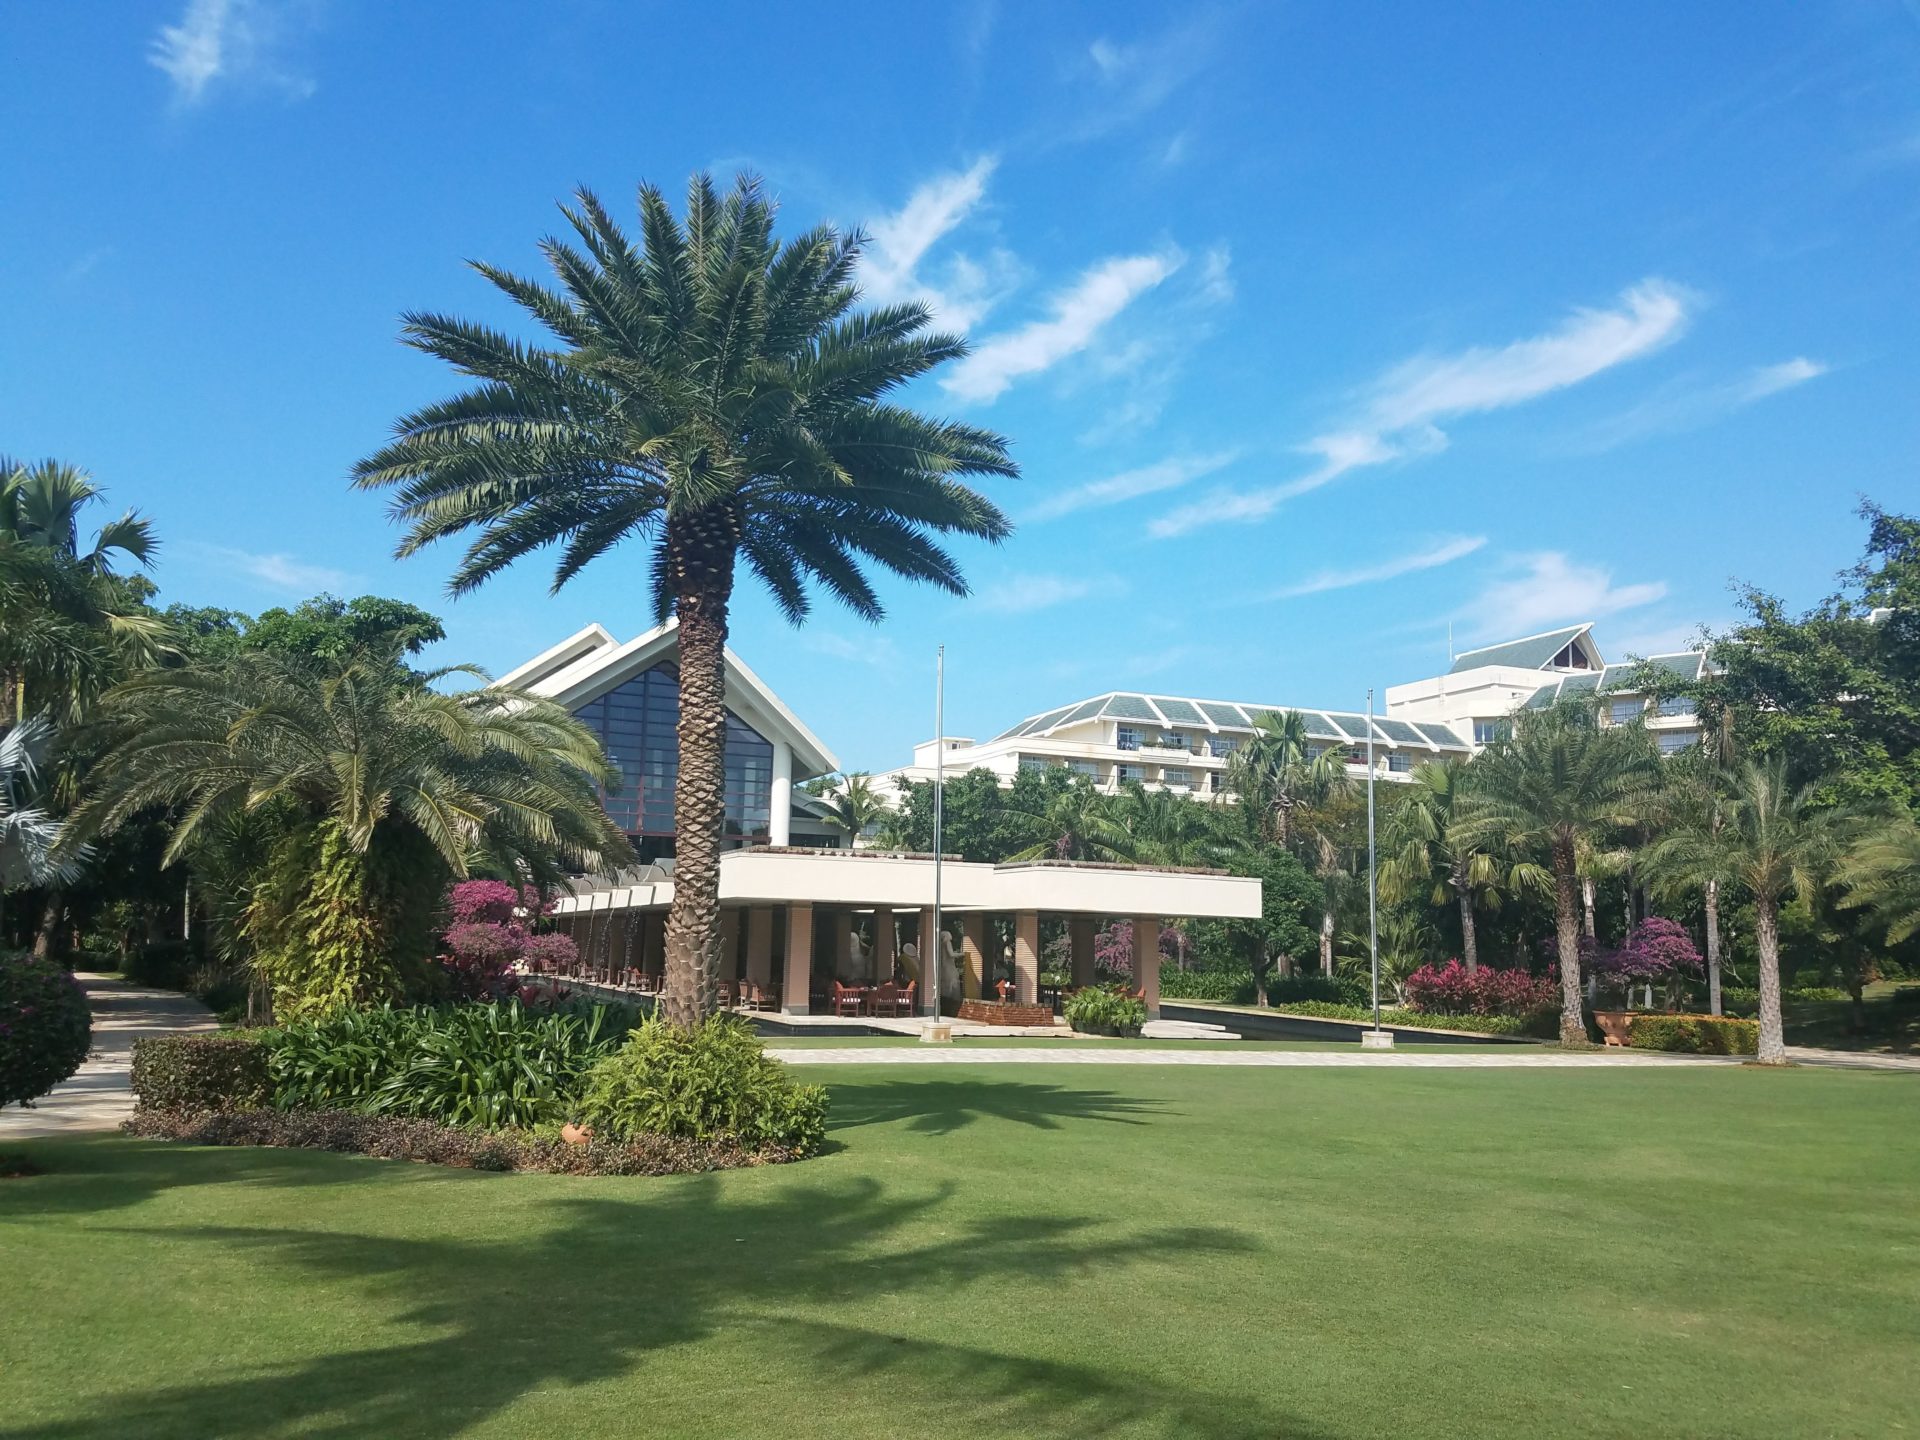 a large lawn with palm trees and a building in the background